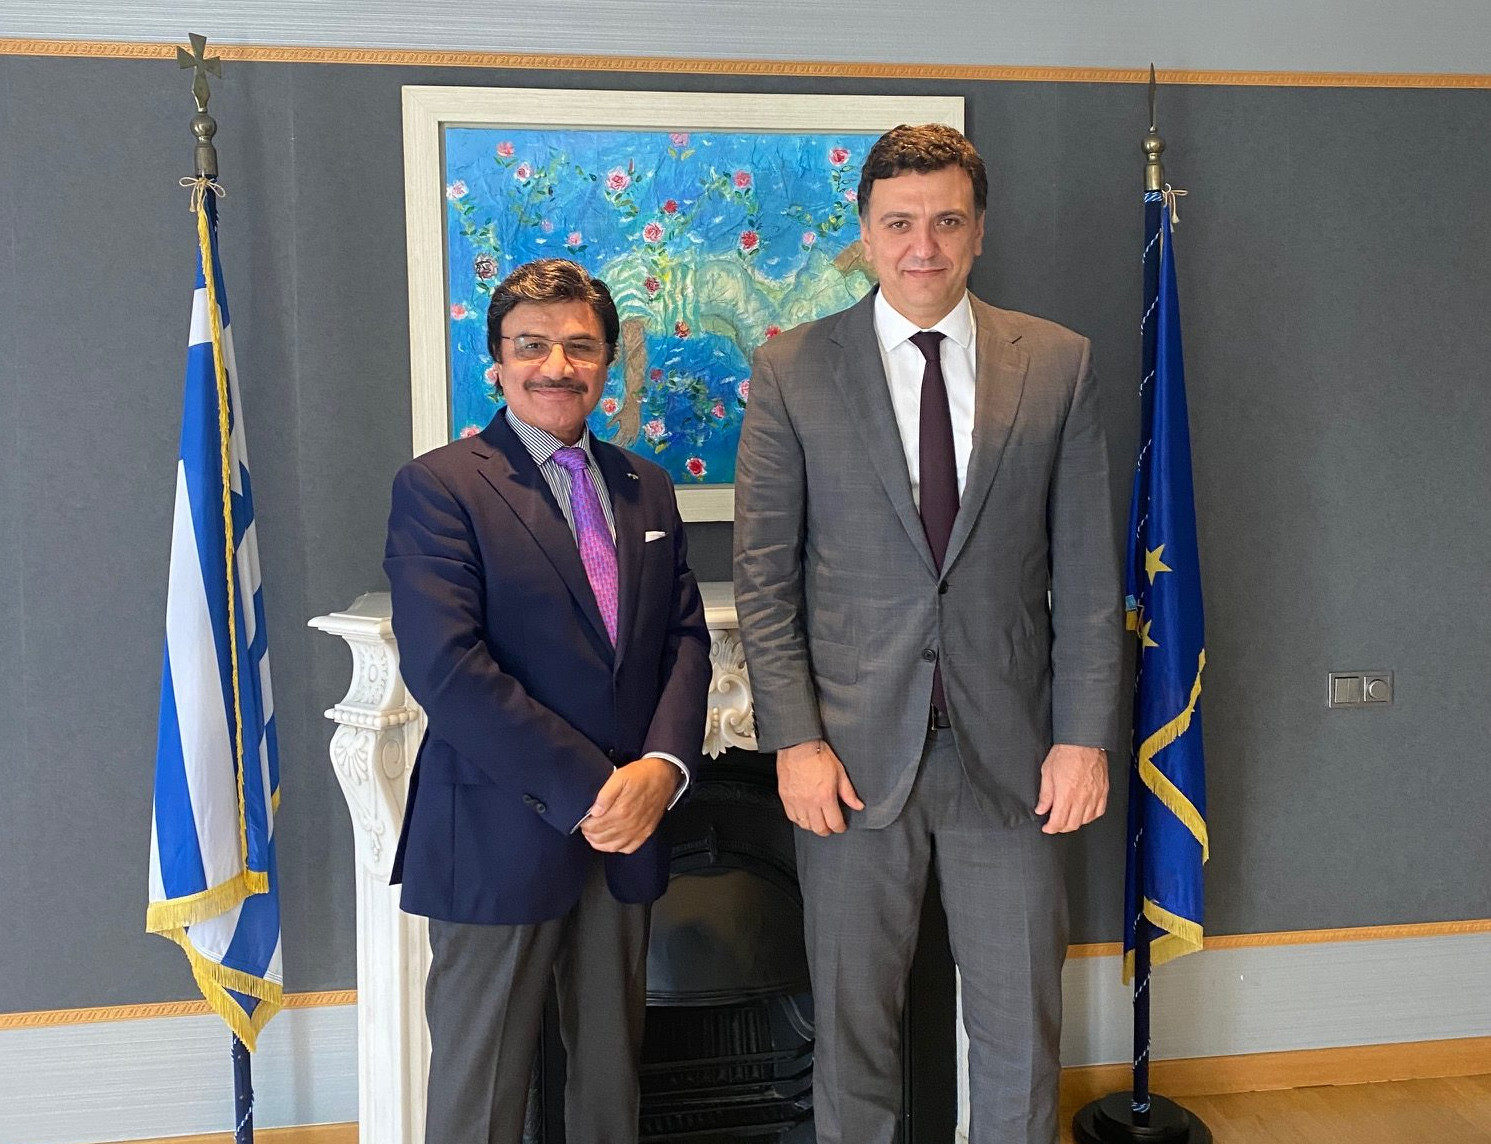 Kikilias – Investments at the center of the meeting with the UAE ambassador